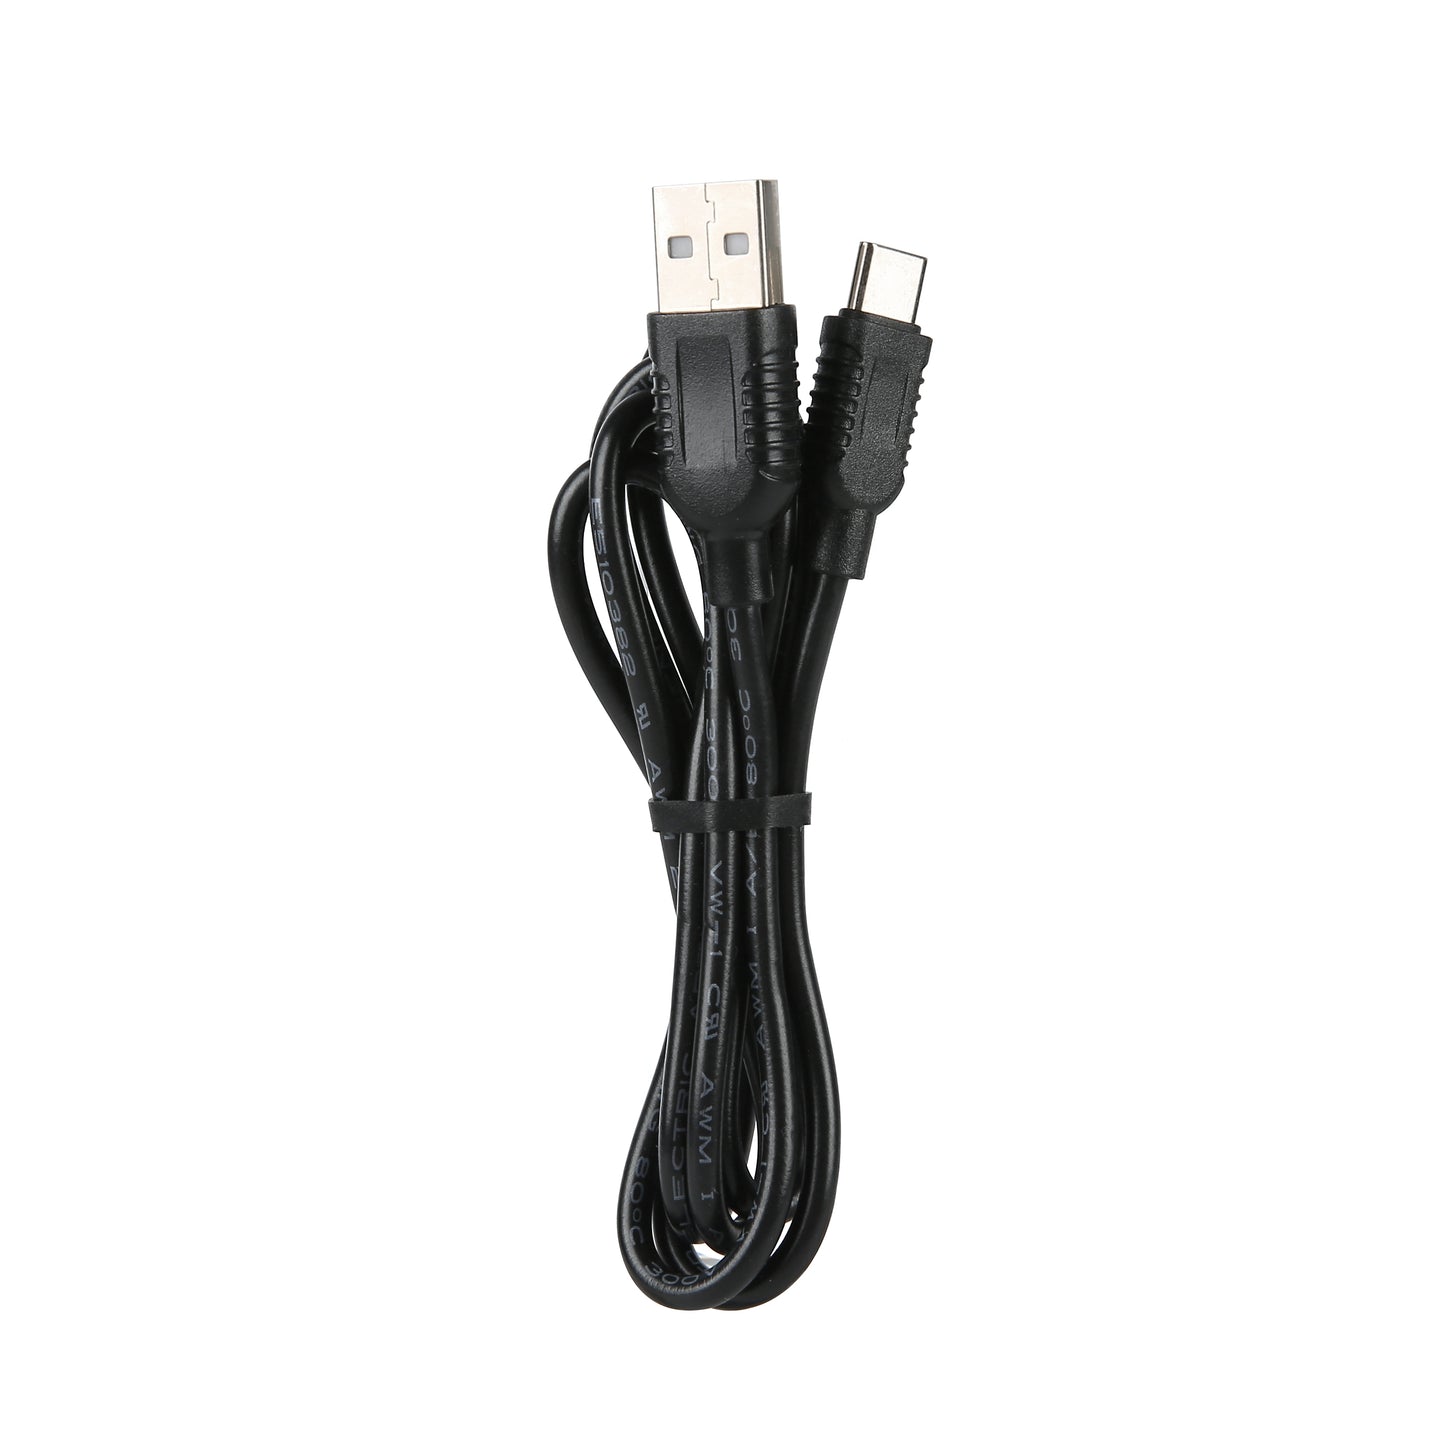 MedSense Universal Type-C Adapter Charger Cable